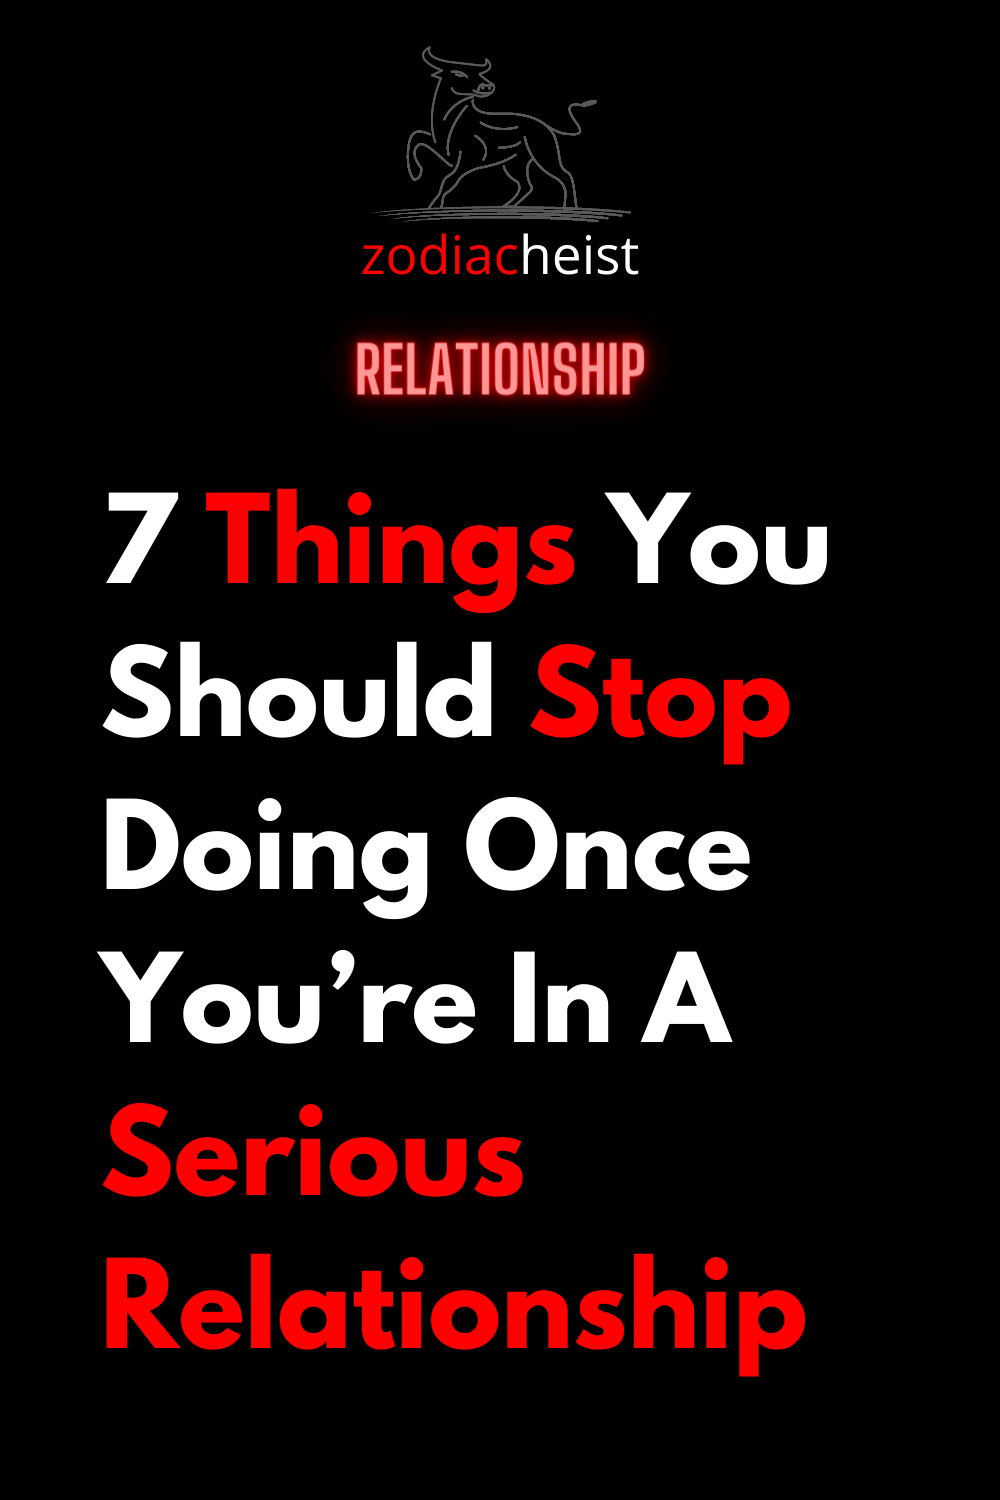 7 Things You Should Stop Doing Once You’re In A Serious Relationship